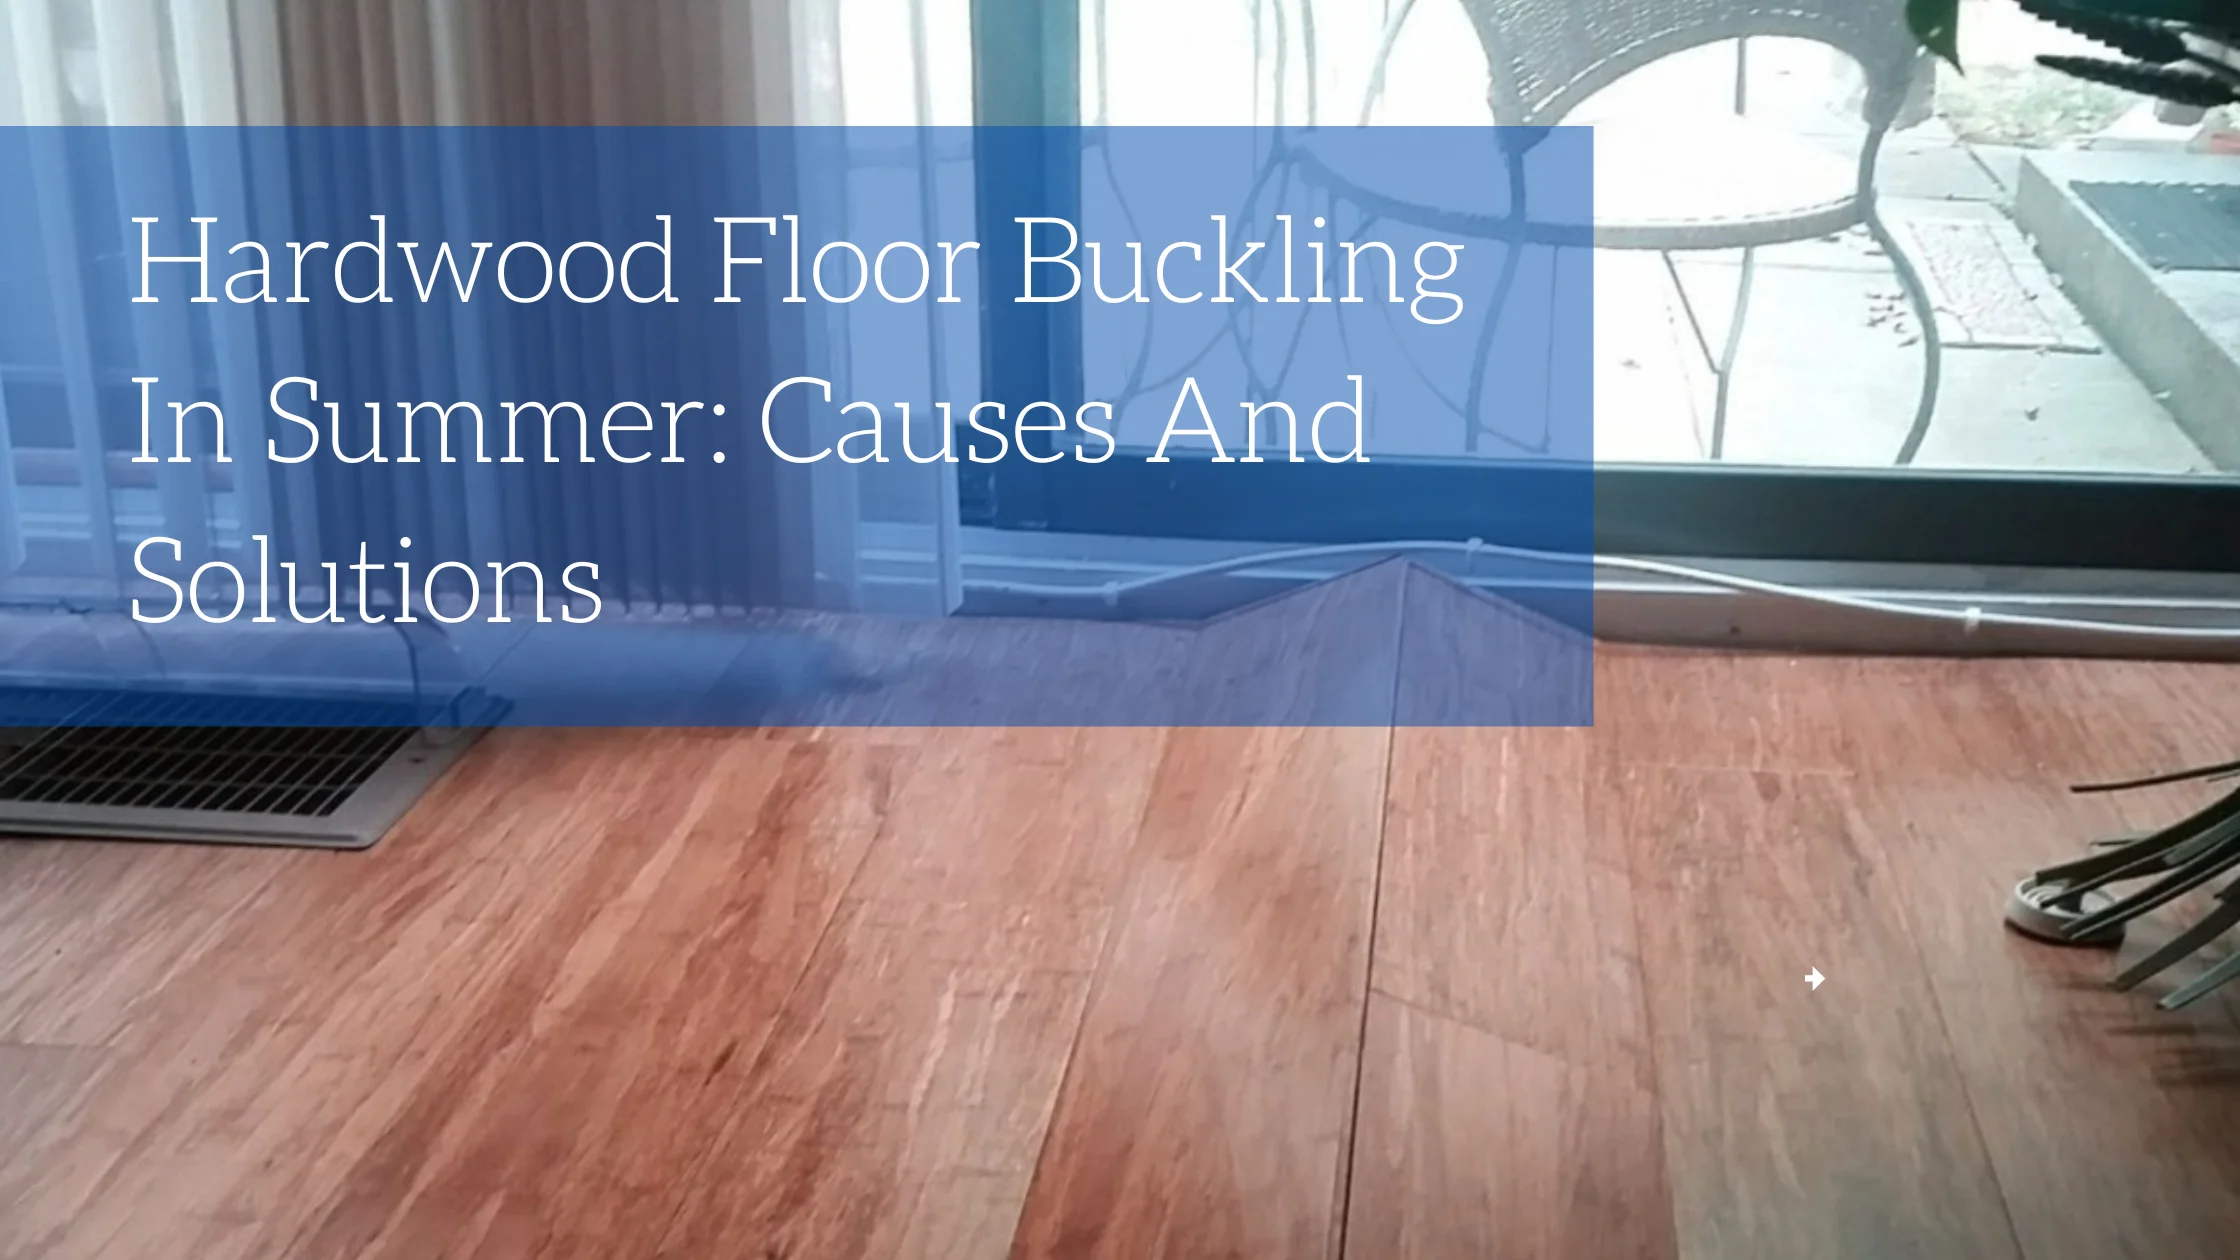 Hardwood Floor Buckling In Summer: Causes And Solutions